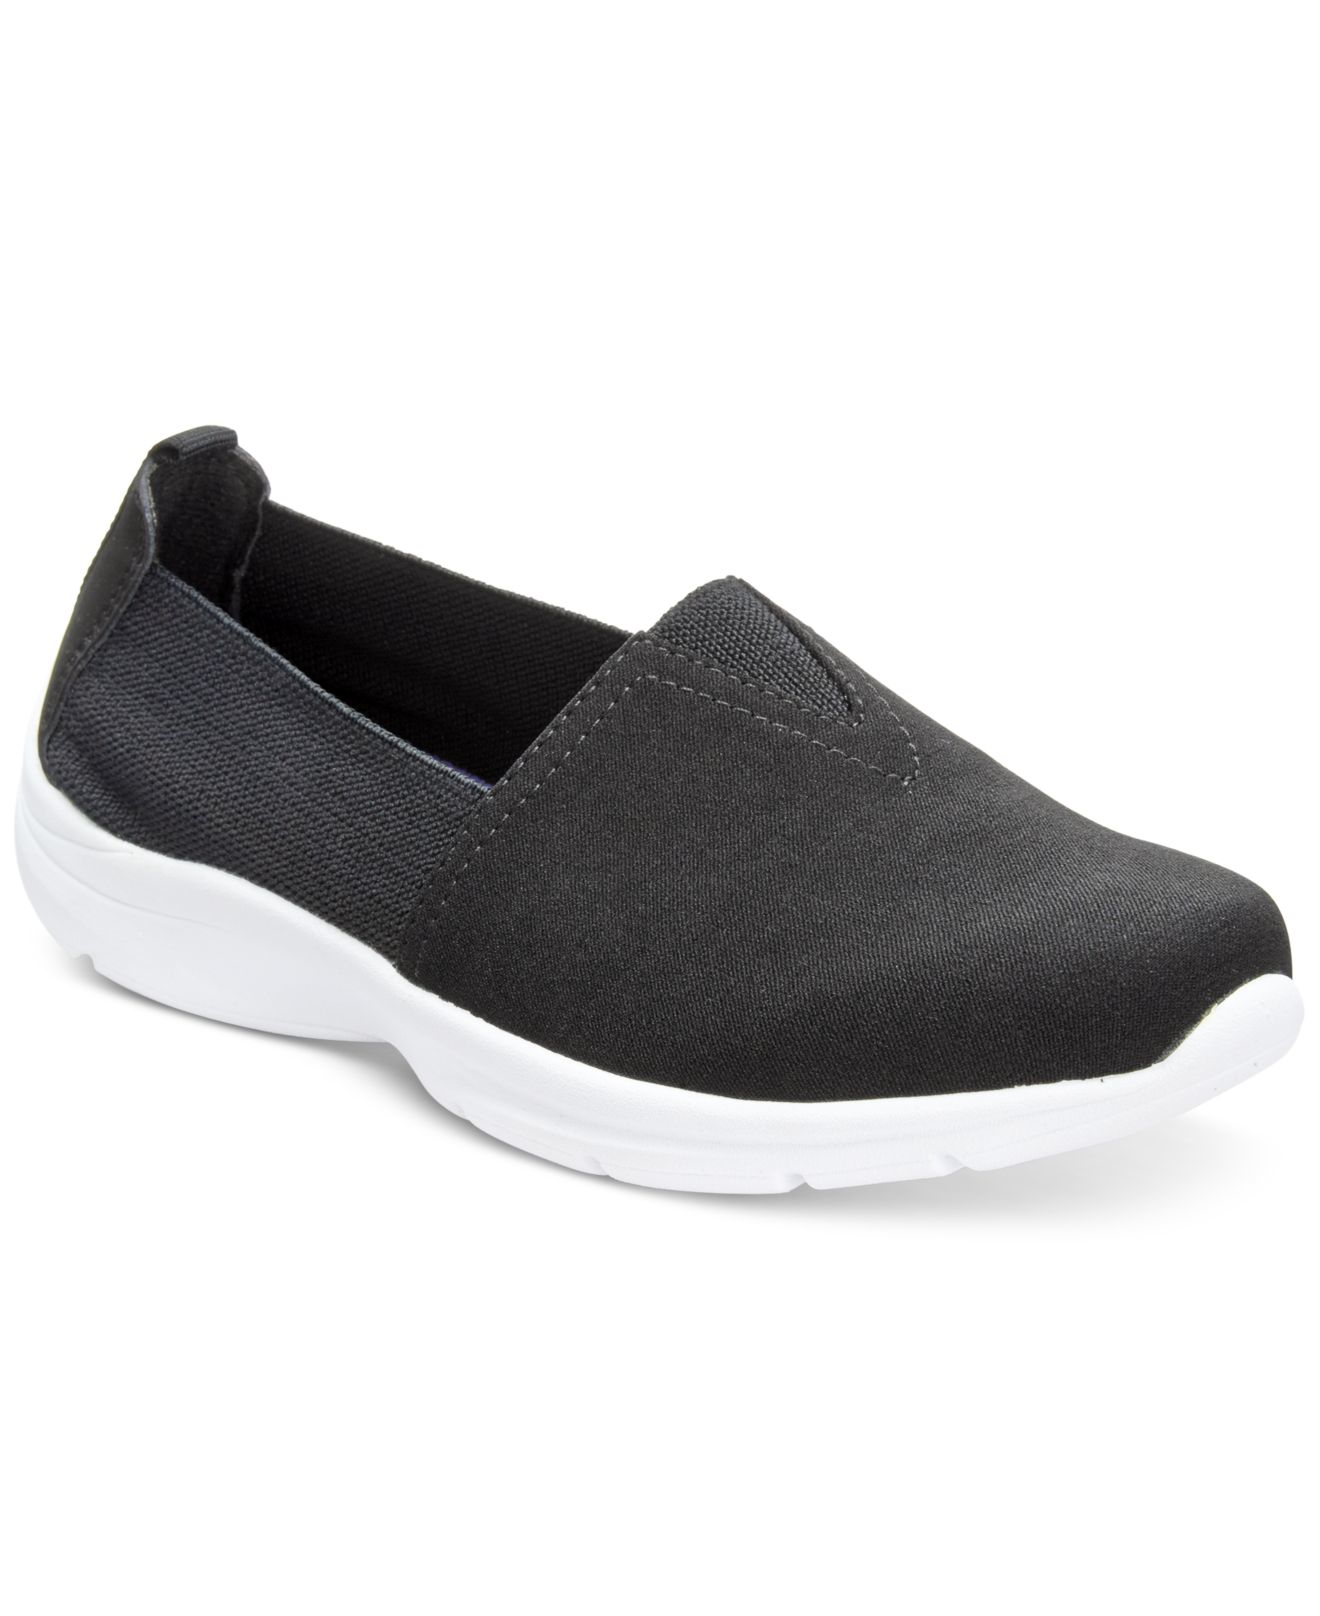 Easy spirit Quirky Sneakers in Black | Lyst